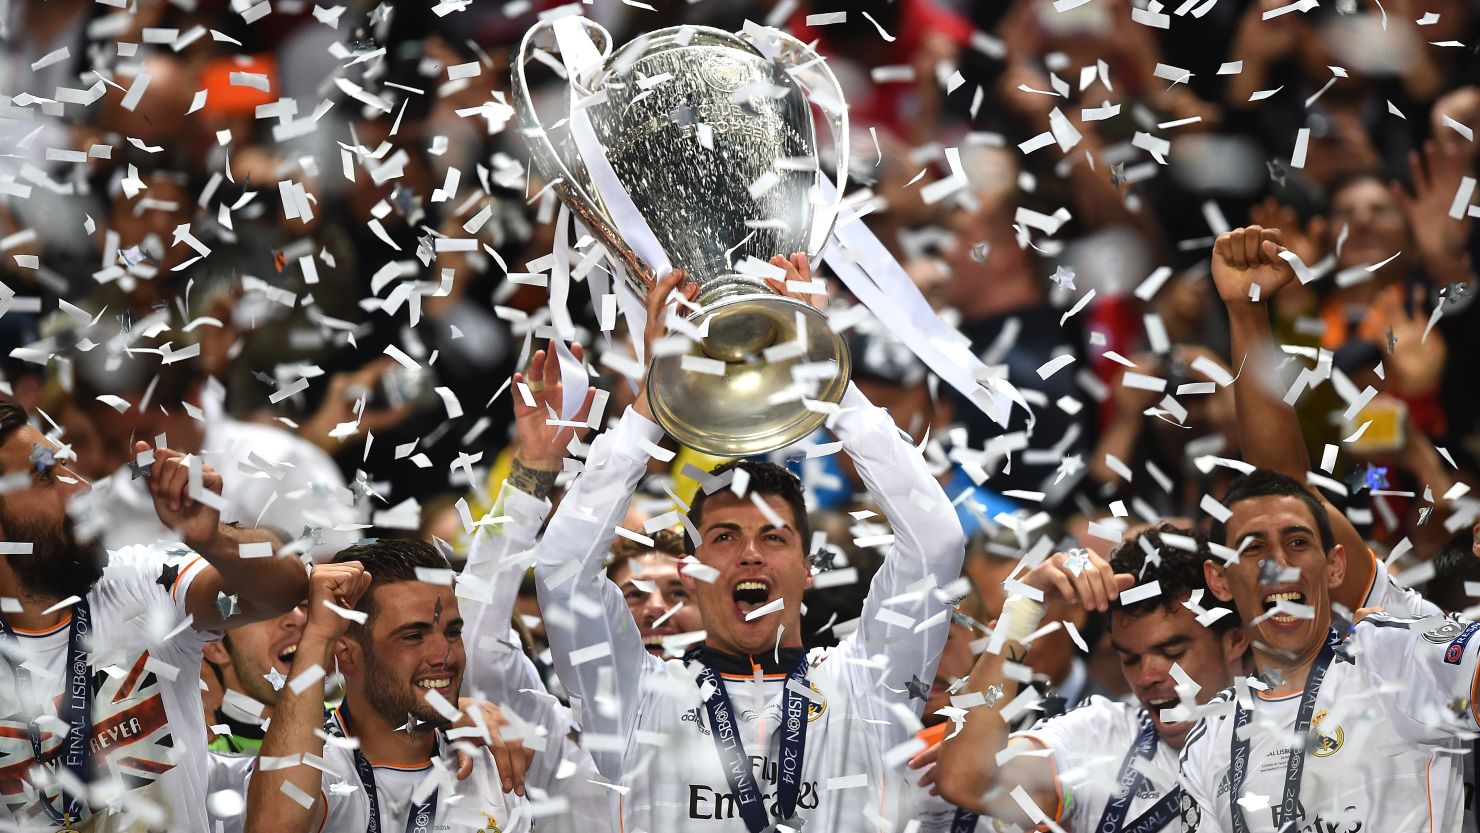 Cristiano Ronaldo has helped Real Madrid to a pair of Champions League crowns during his spell at the club.